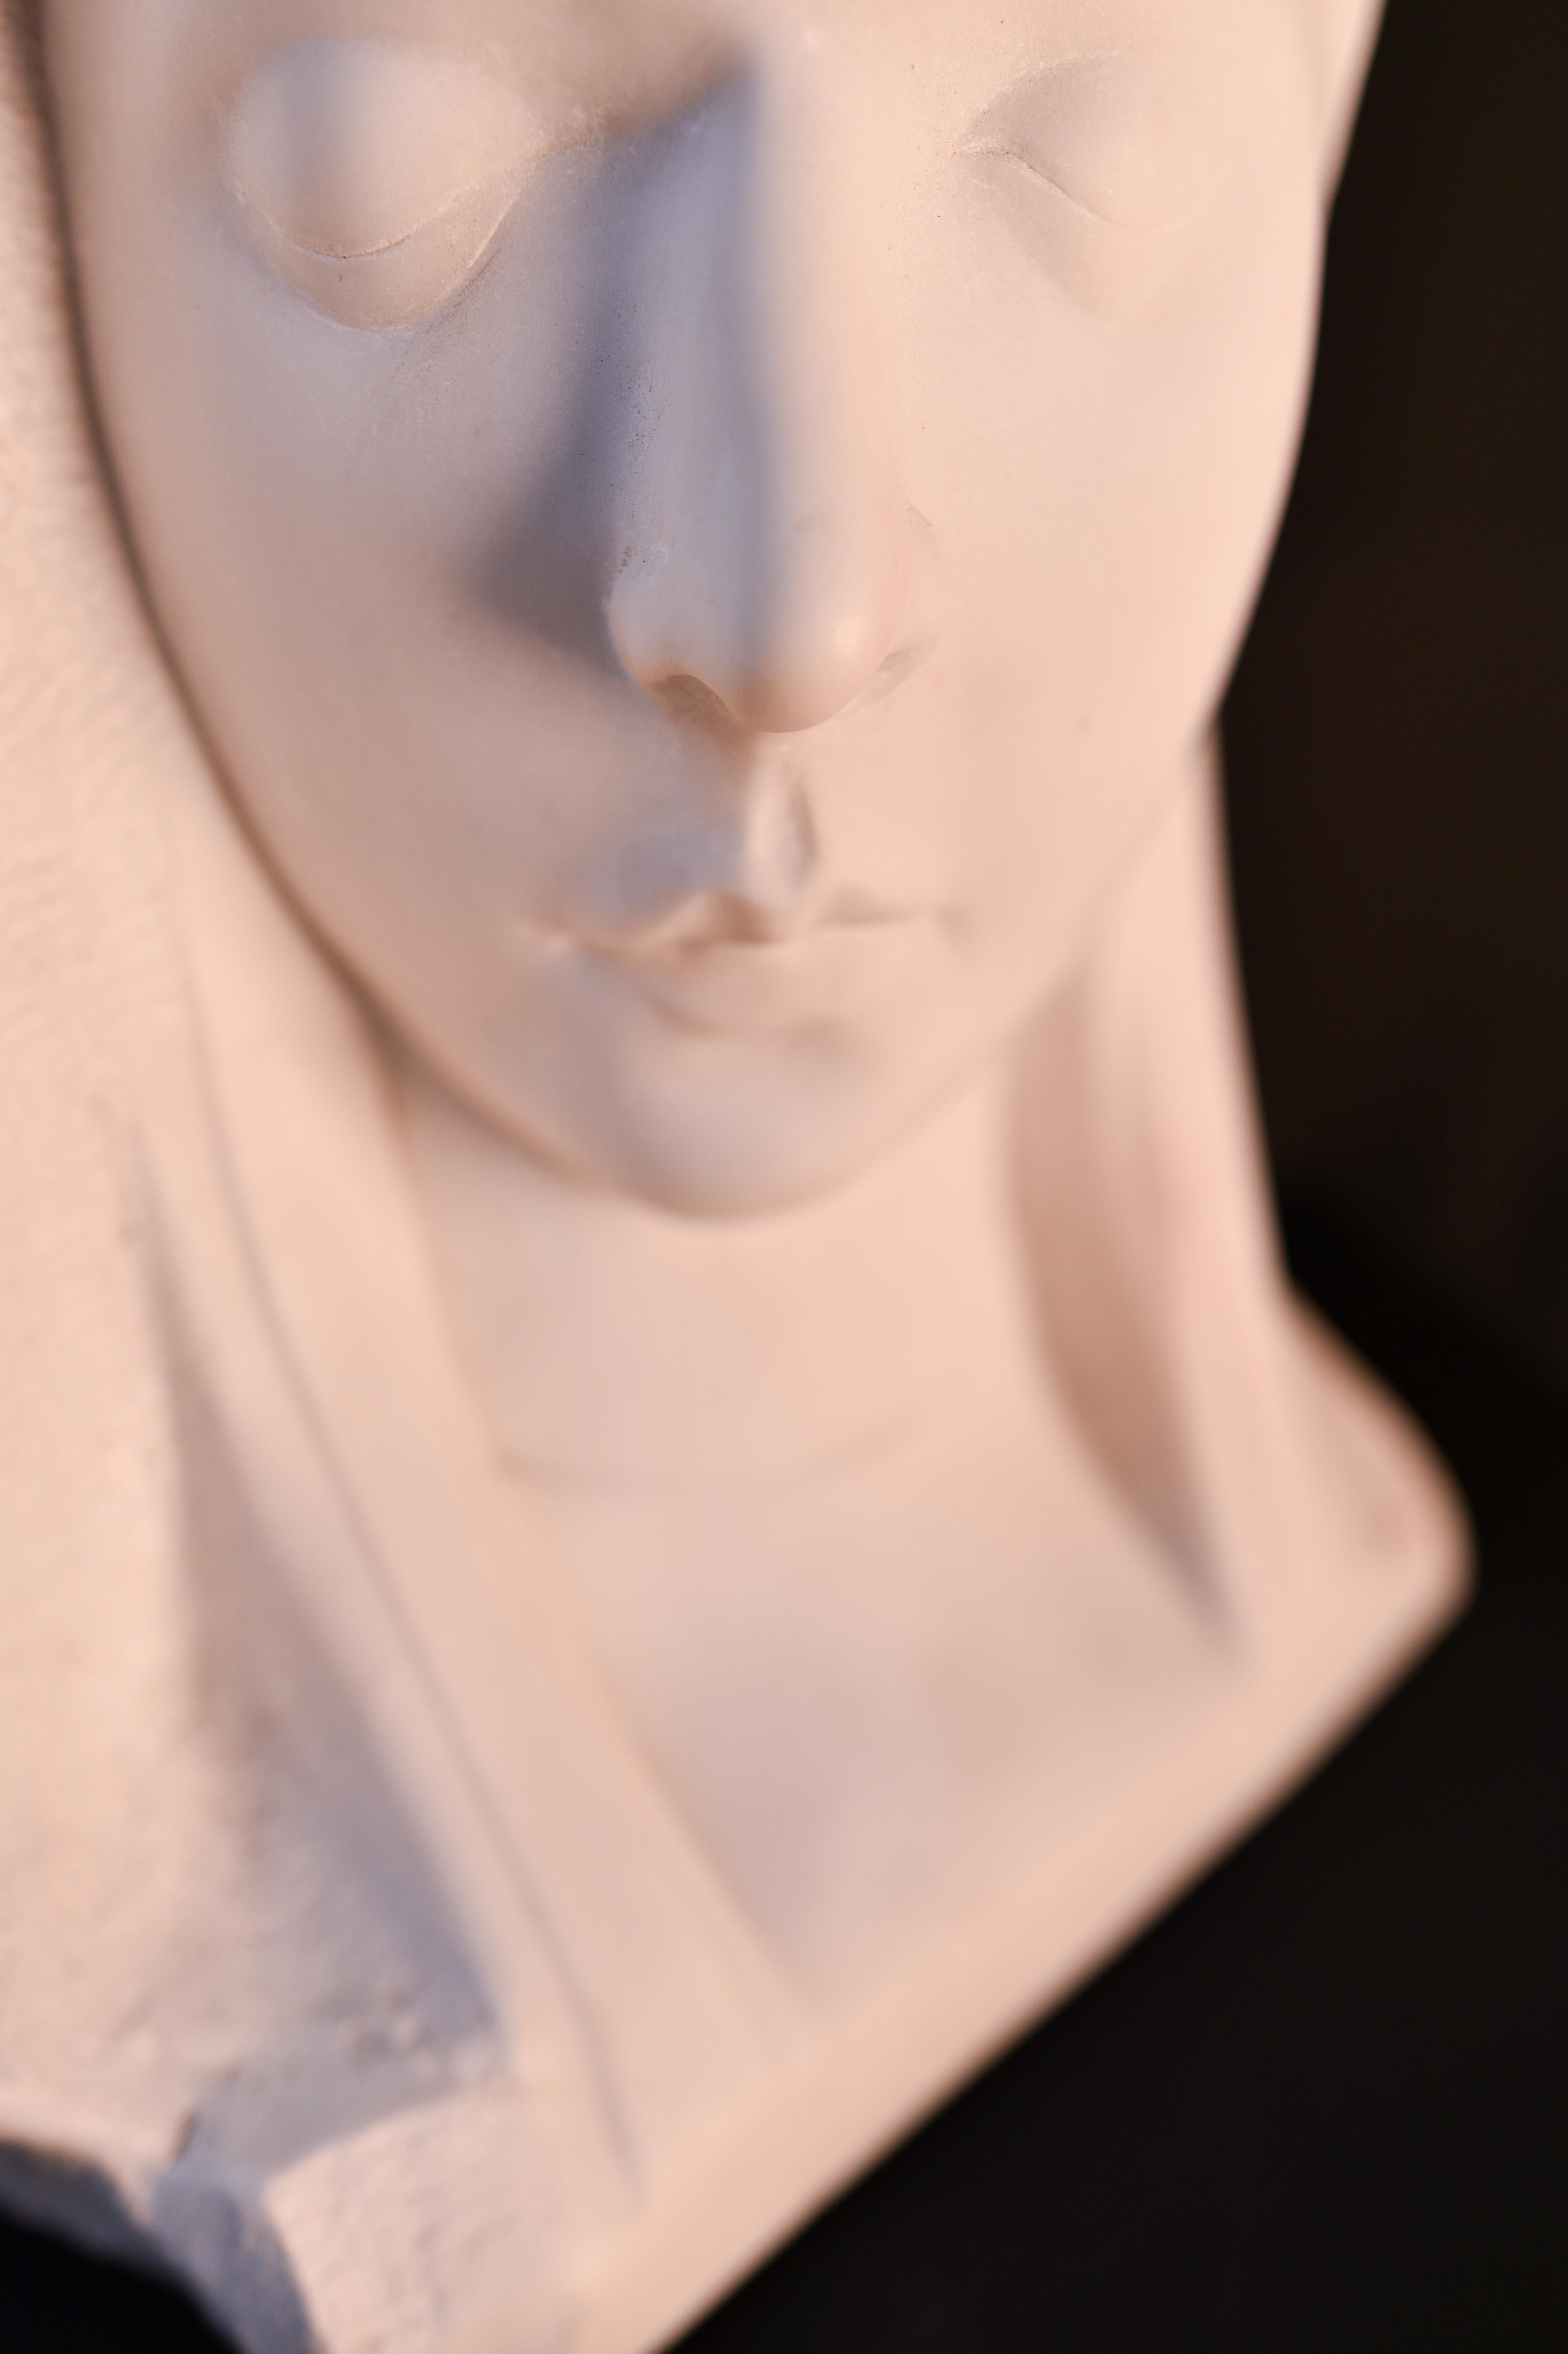 The bust portrays a woman with very serene and soft features, even with mystic appearance. 

The piece is signed, as can be seen on 1 of the pictures. 